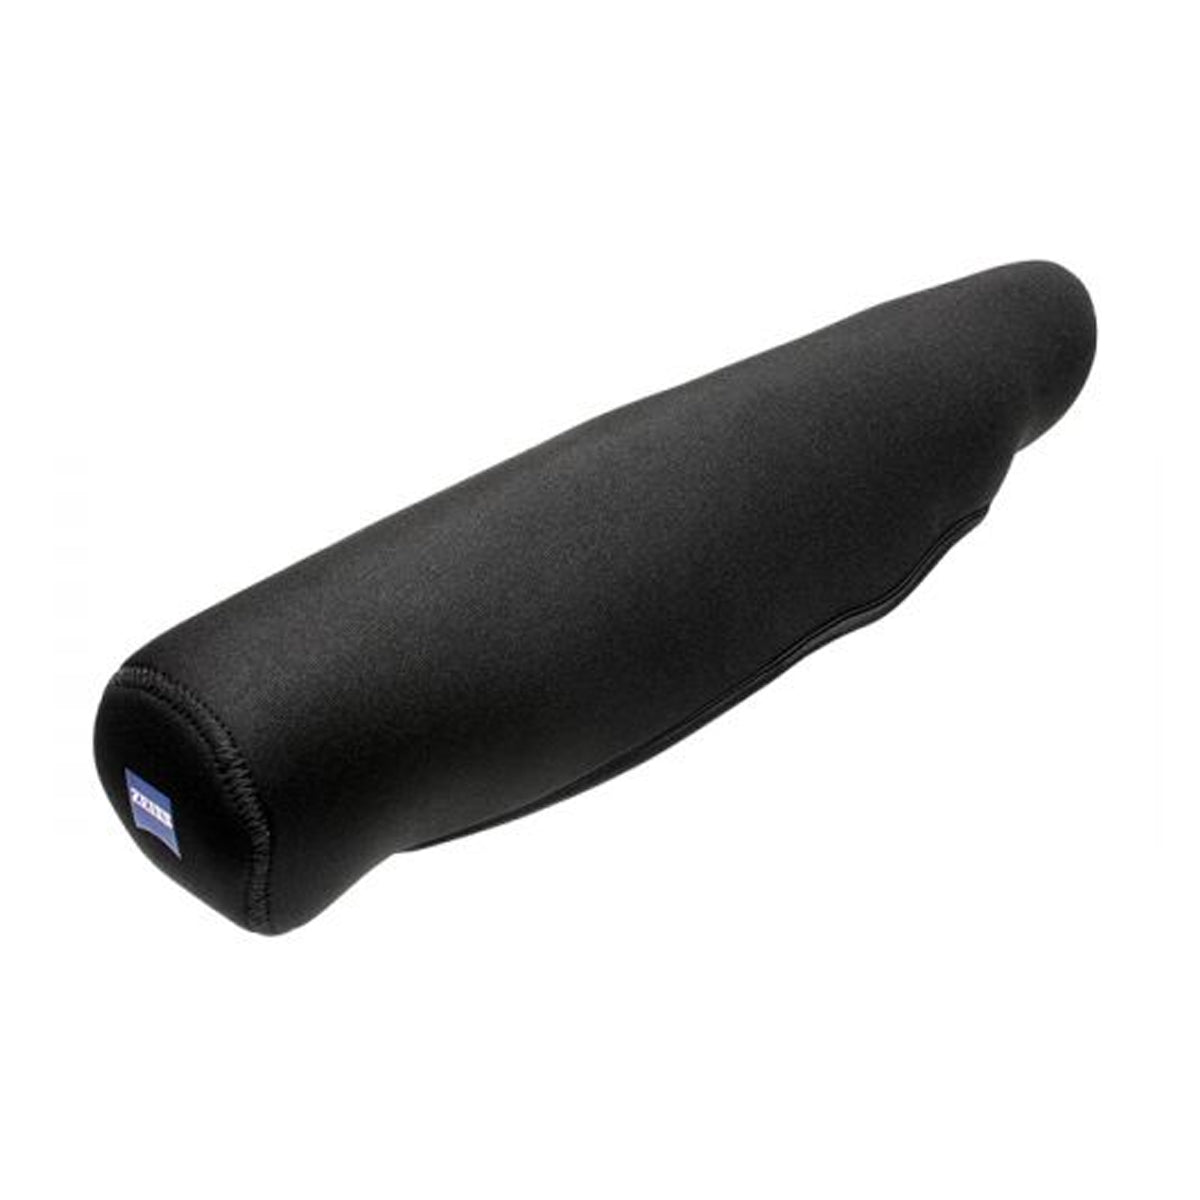 Zeiss Soft Rifle Scope Cover in  by GOHUNT | Zeiss - GOHUNT Shop